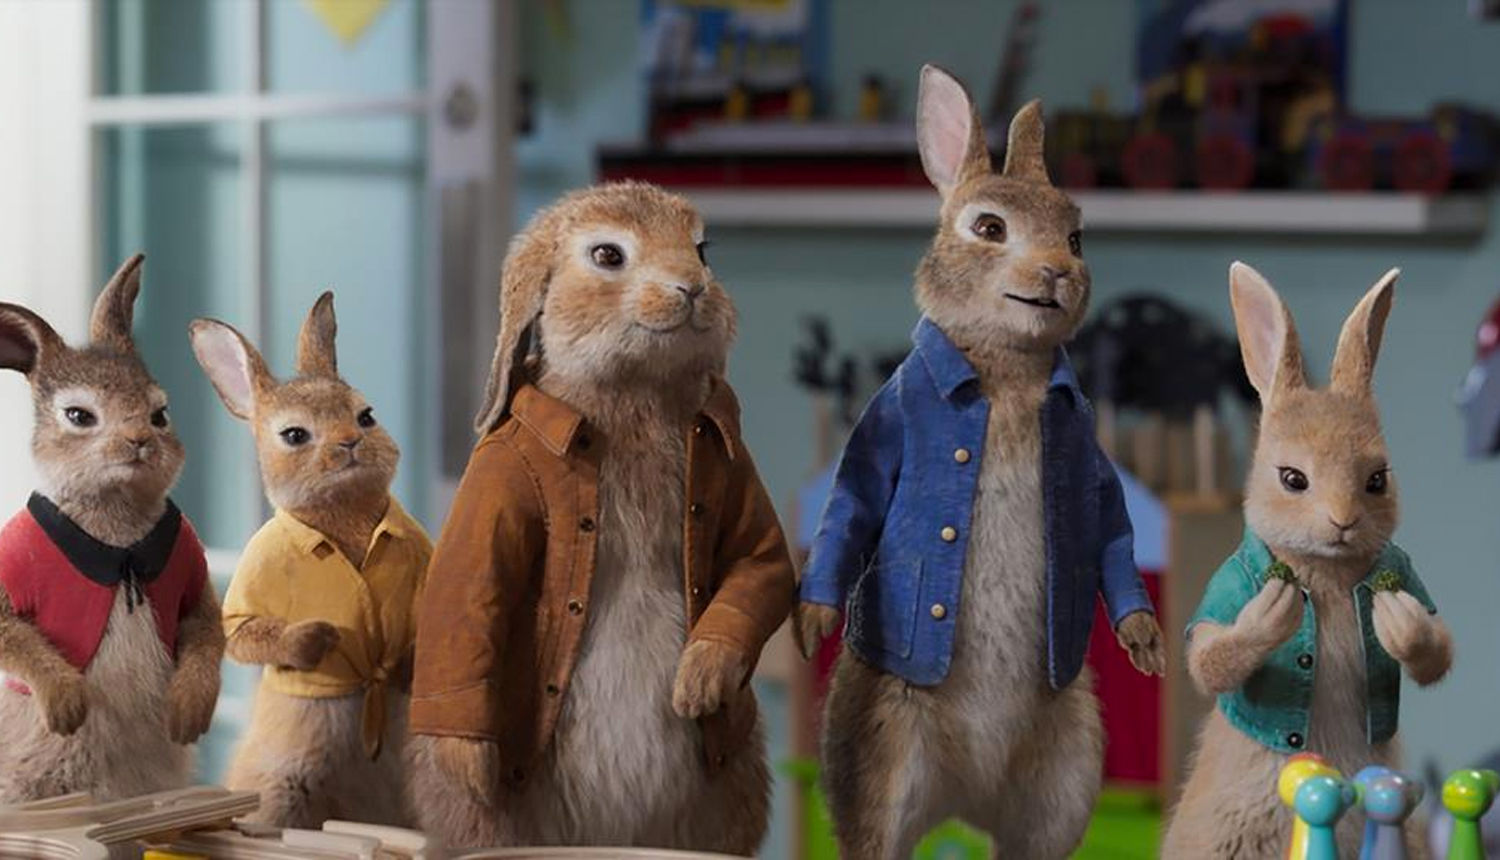 Peter Rabbit 2 - The Runaway Review: No Funny From This Bunny